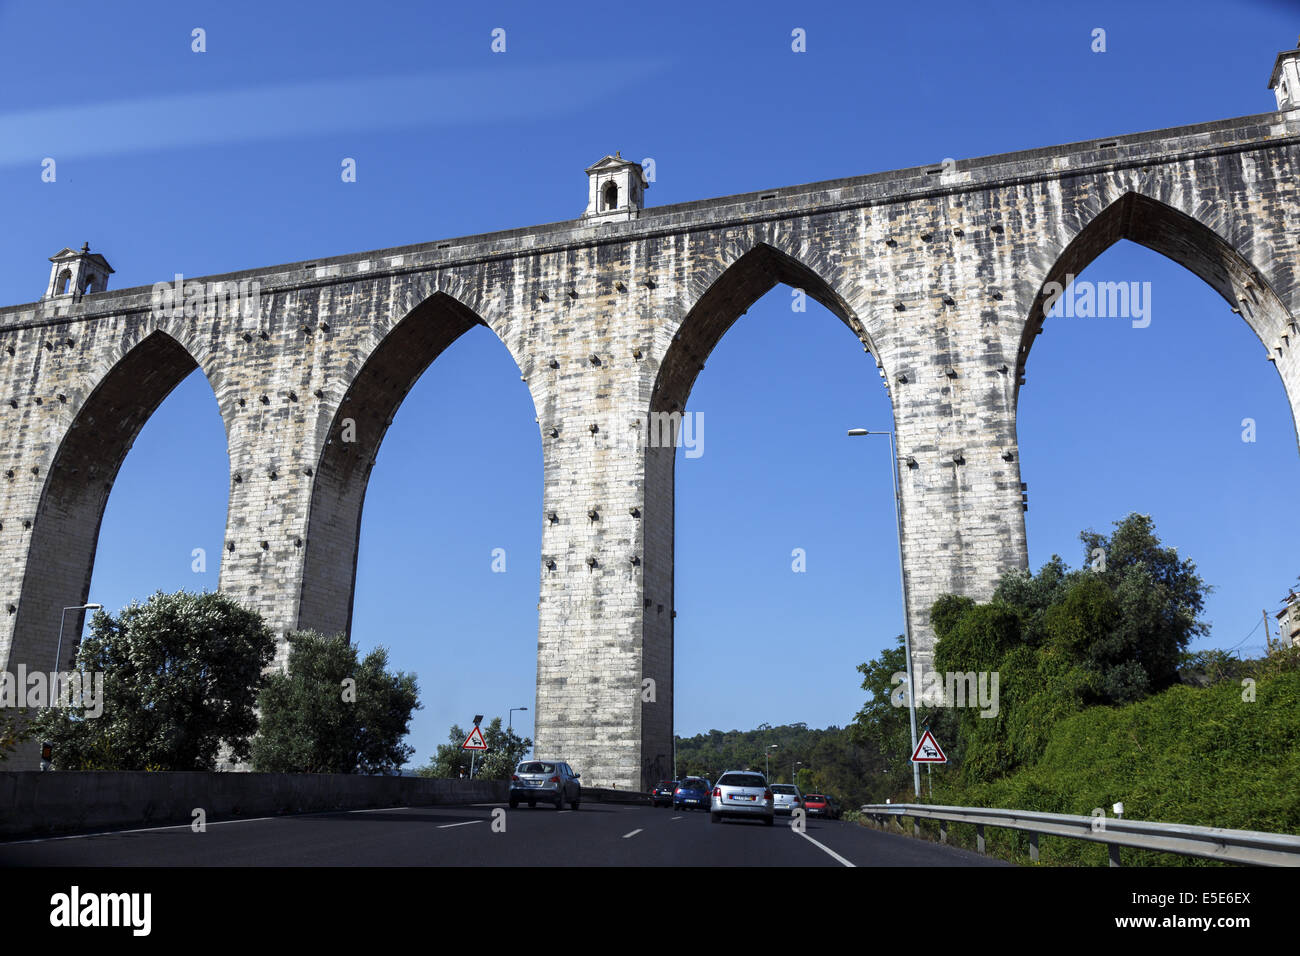 The Aguas Livres Aqueduct 'Aqueduct of the Free Waters' ia historic aqueduct in the city of Lisbon Portugal Stock Photo